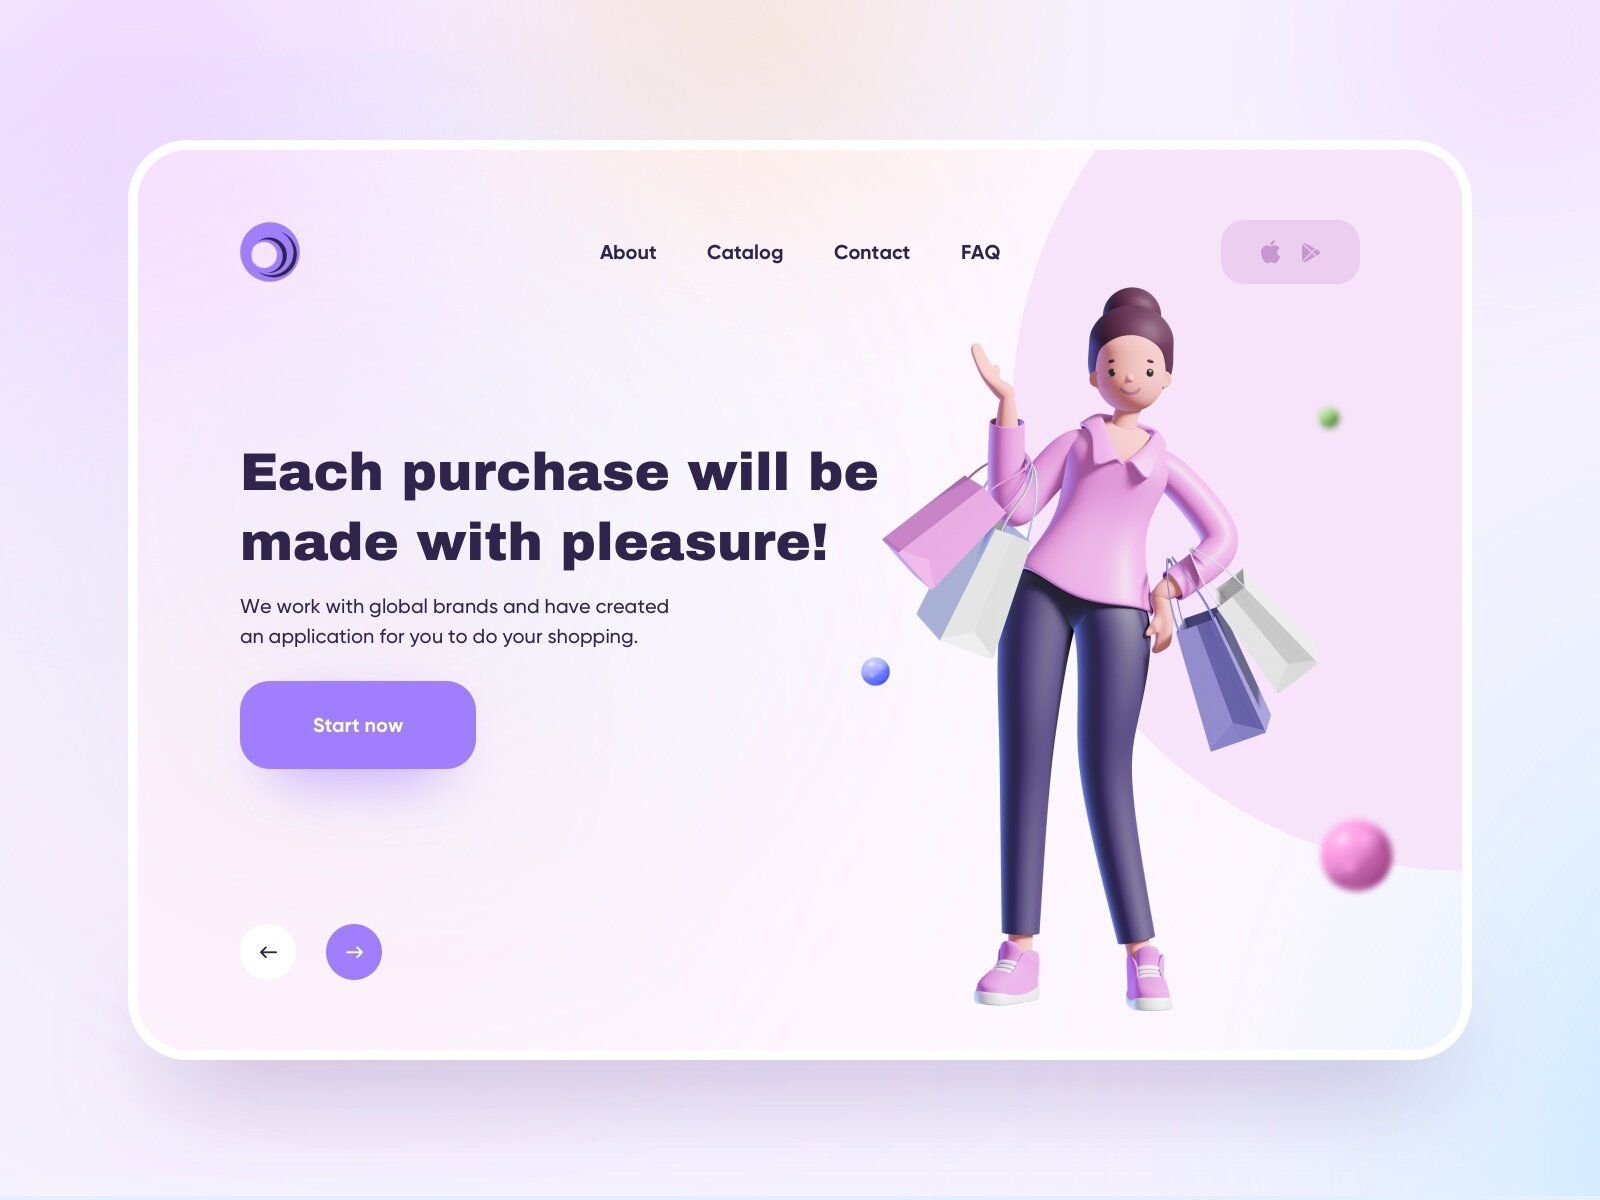 Website market place business (*image by [Anastacia](https://dribbble.com/anastasia-tino){ rel="nofollow" target="_blank" .default-md}*)